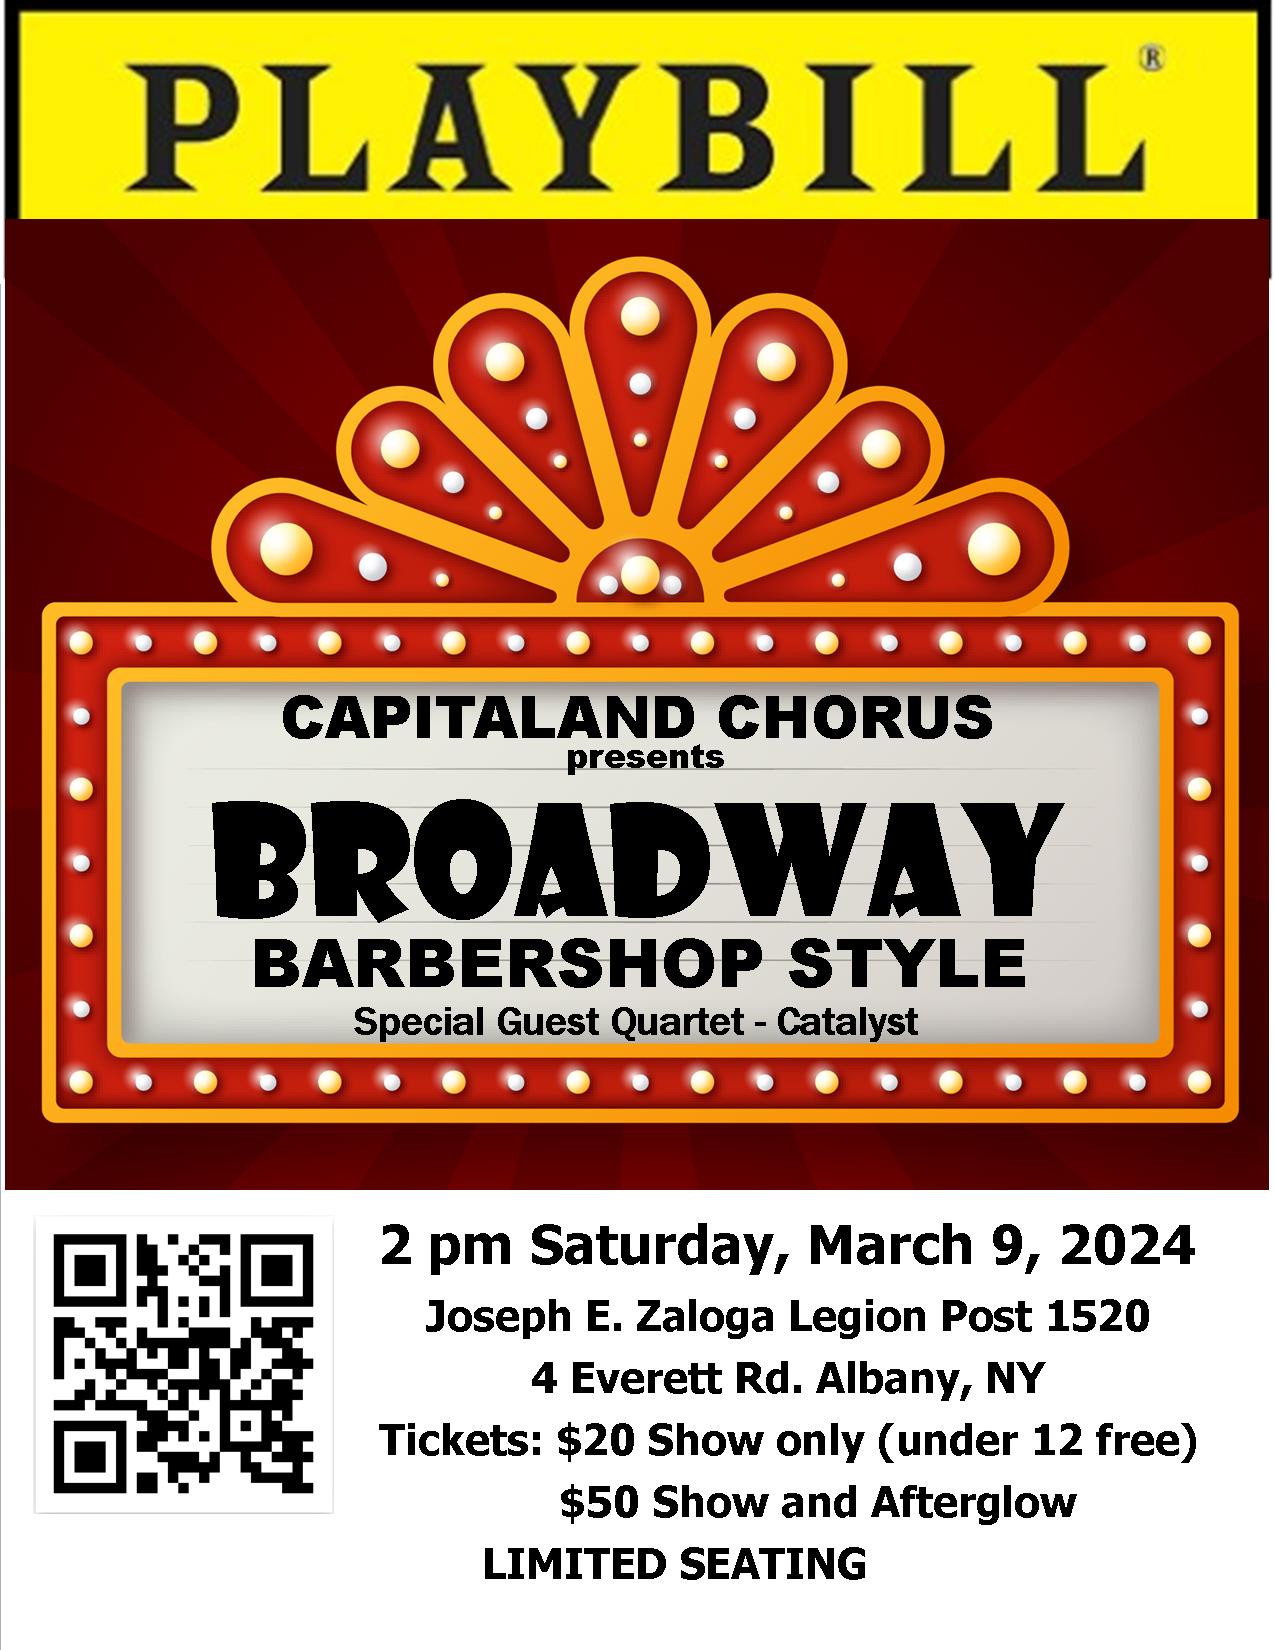 Broadway Barbershop Style - marquee graphic by designed by pikisuperstar / Freepik